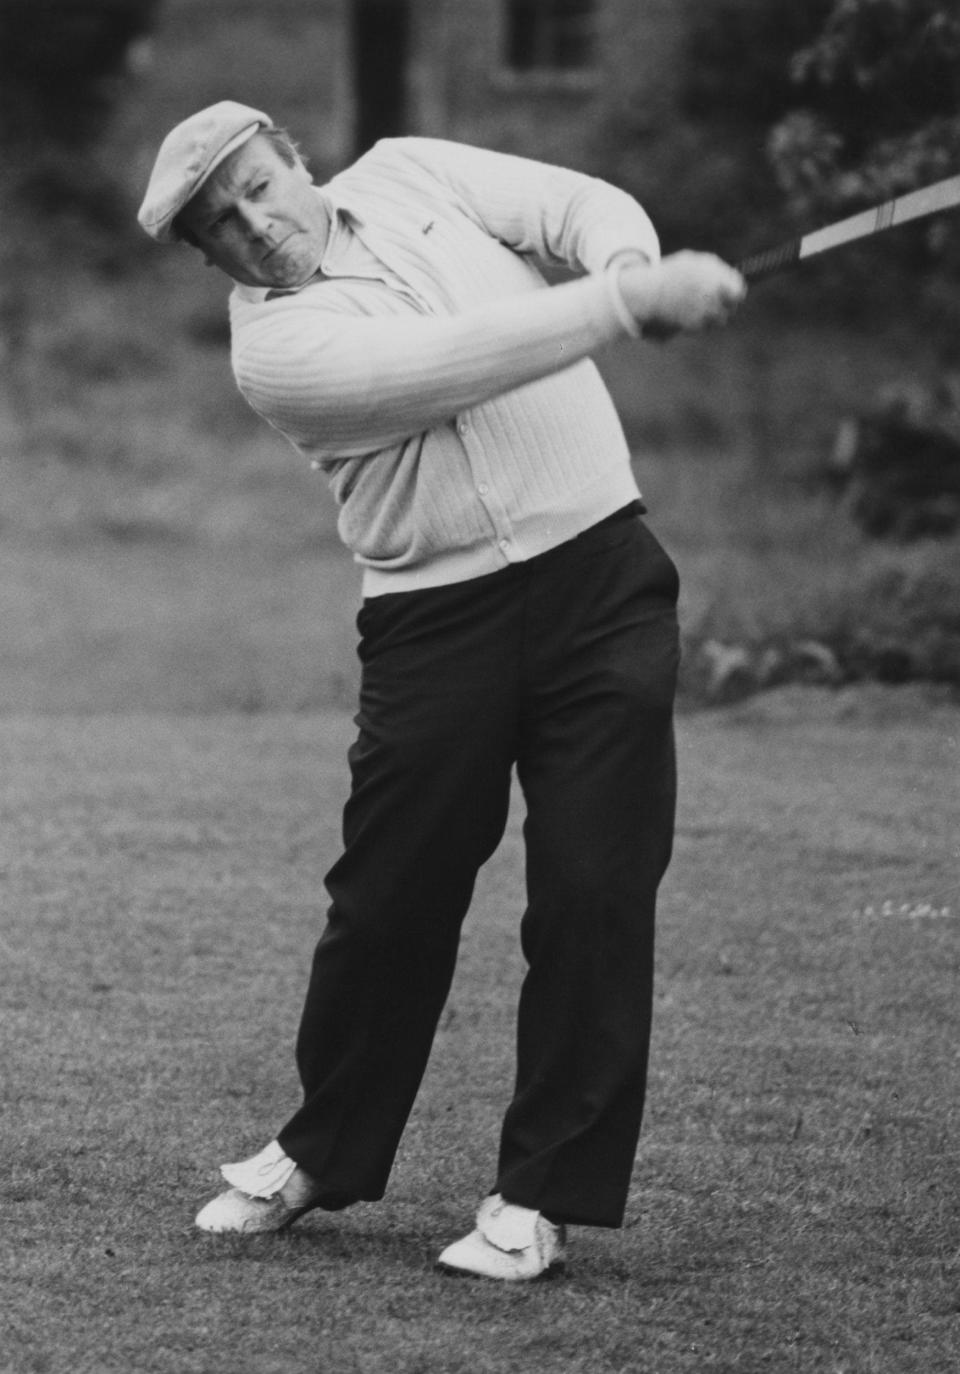 Laidlaw at Wentworth in 1980: his handicap never went below 12, and the 1979 Masters champion Fuzzy Zoeller advised him to stick to dominos - Peter Dazeley/Getty Images